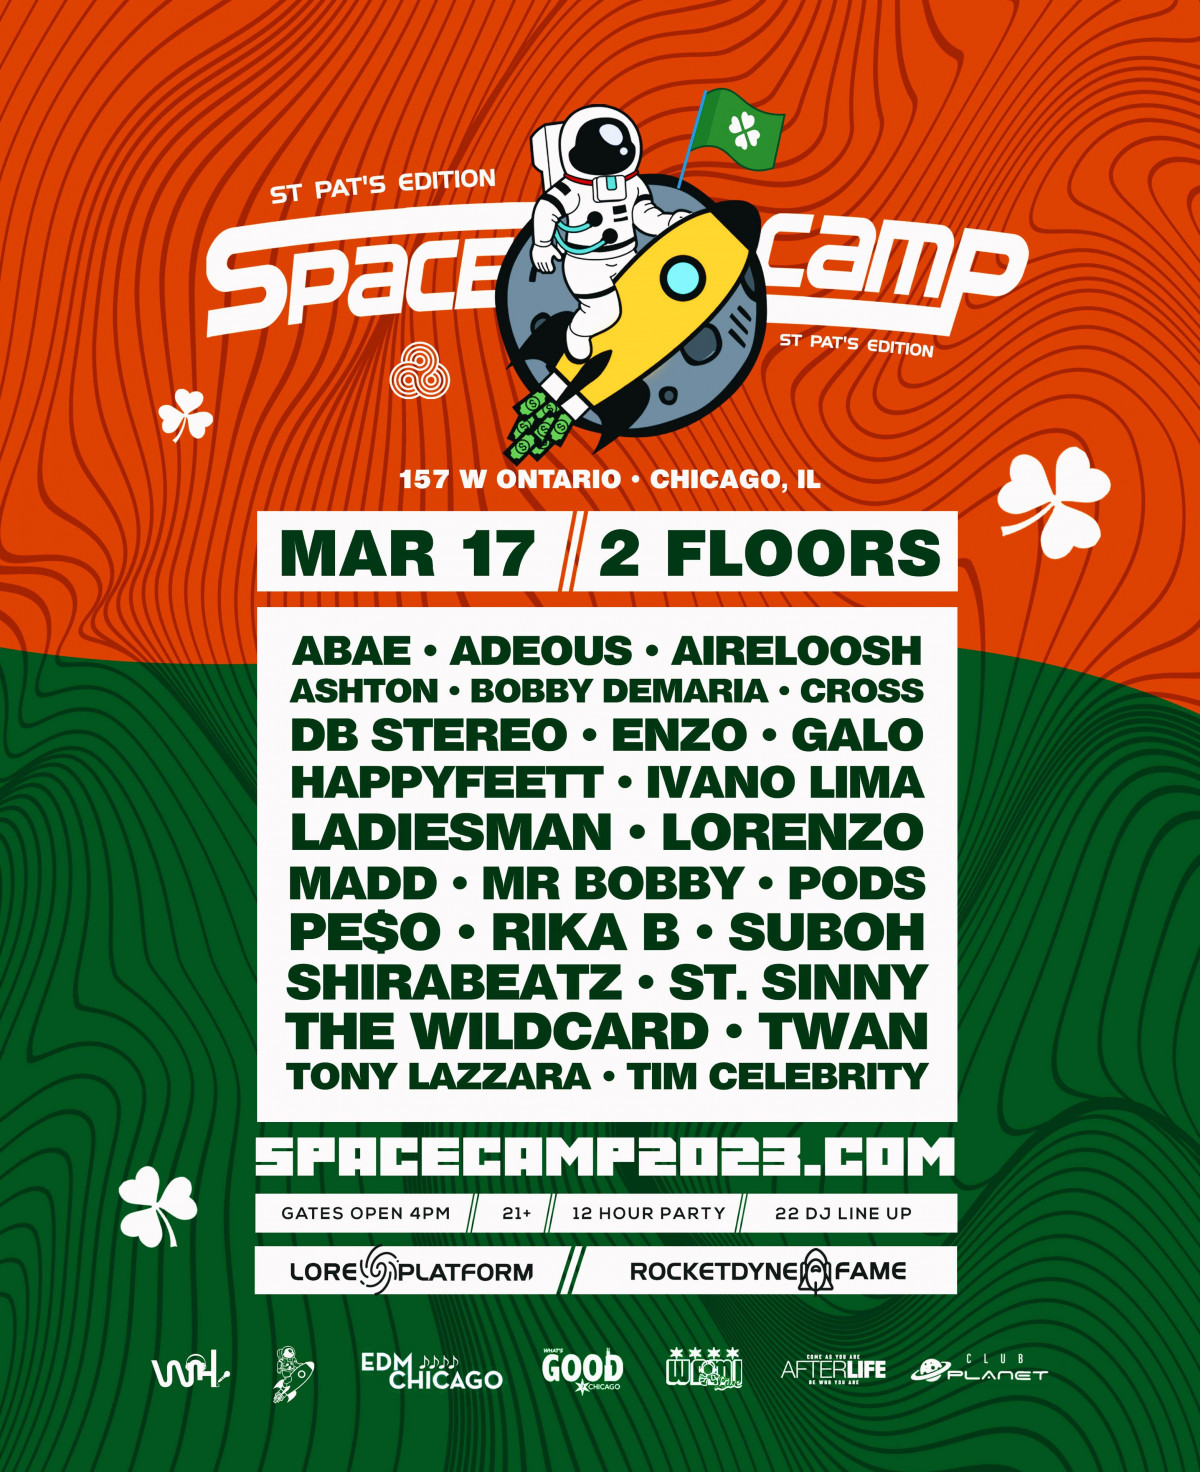 Space Camp St. Paddy’s Edition